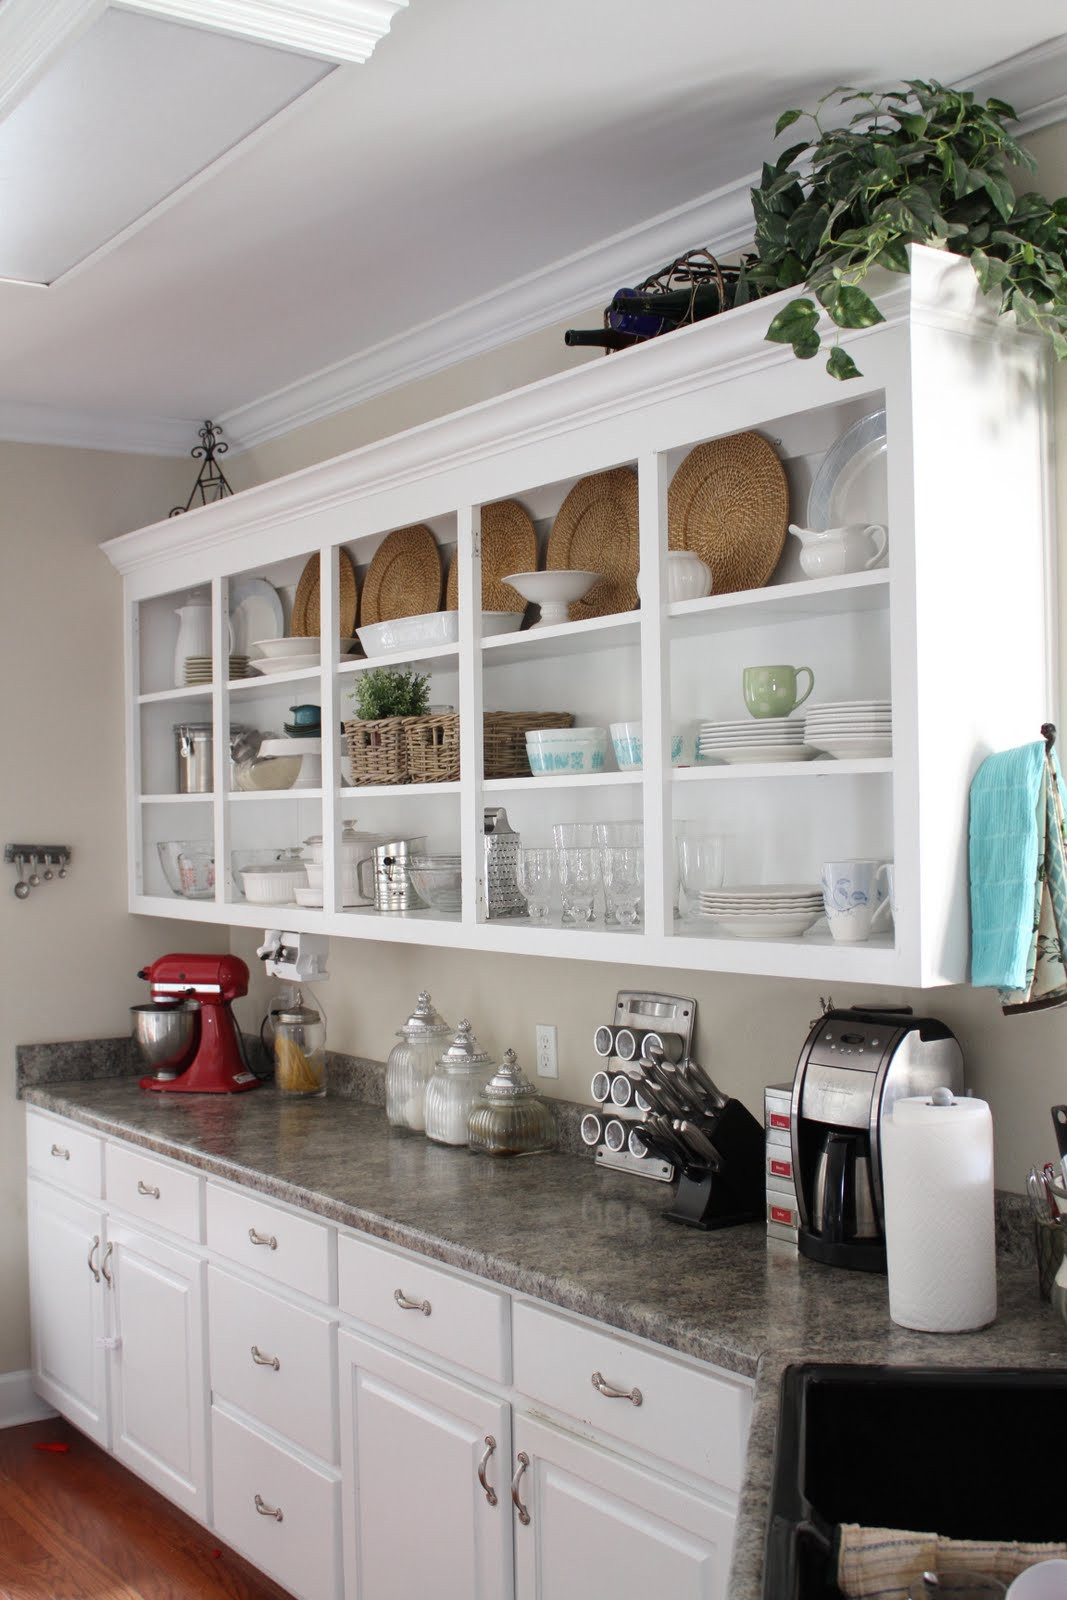 Kitchen Wall Shelves
 Kitchen Inspiration Swoon Worthy Open Shelving Swoon Worthy